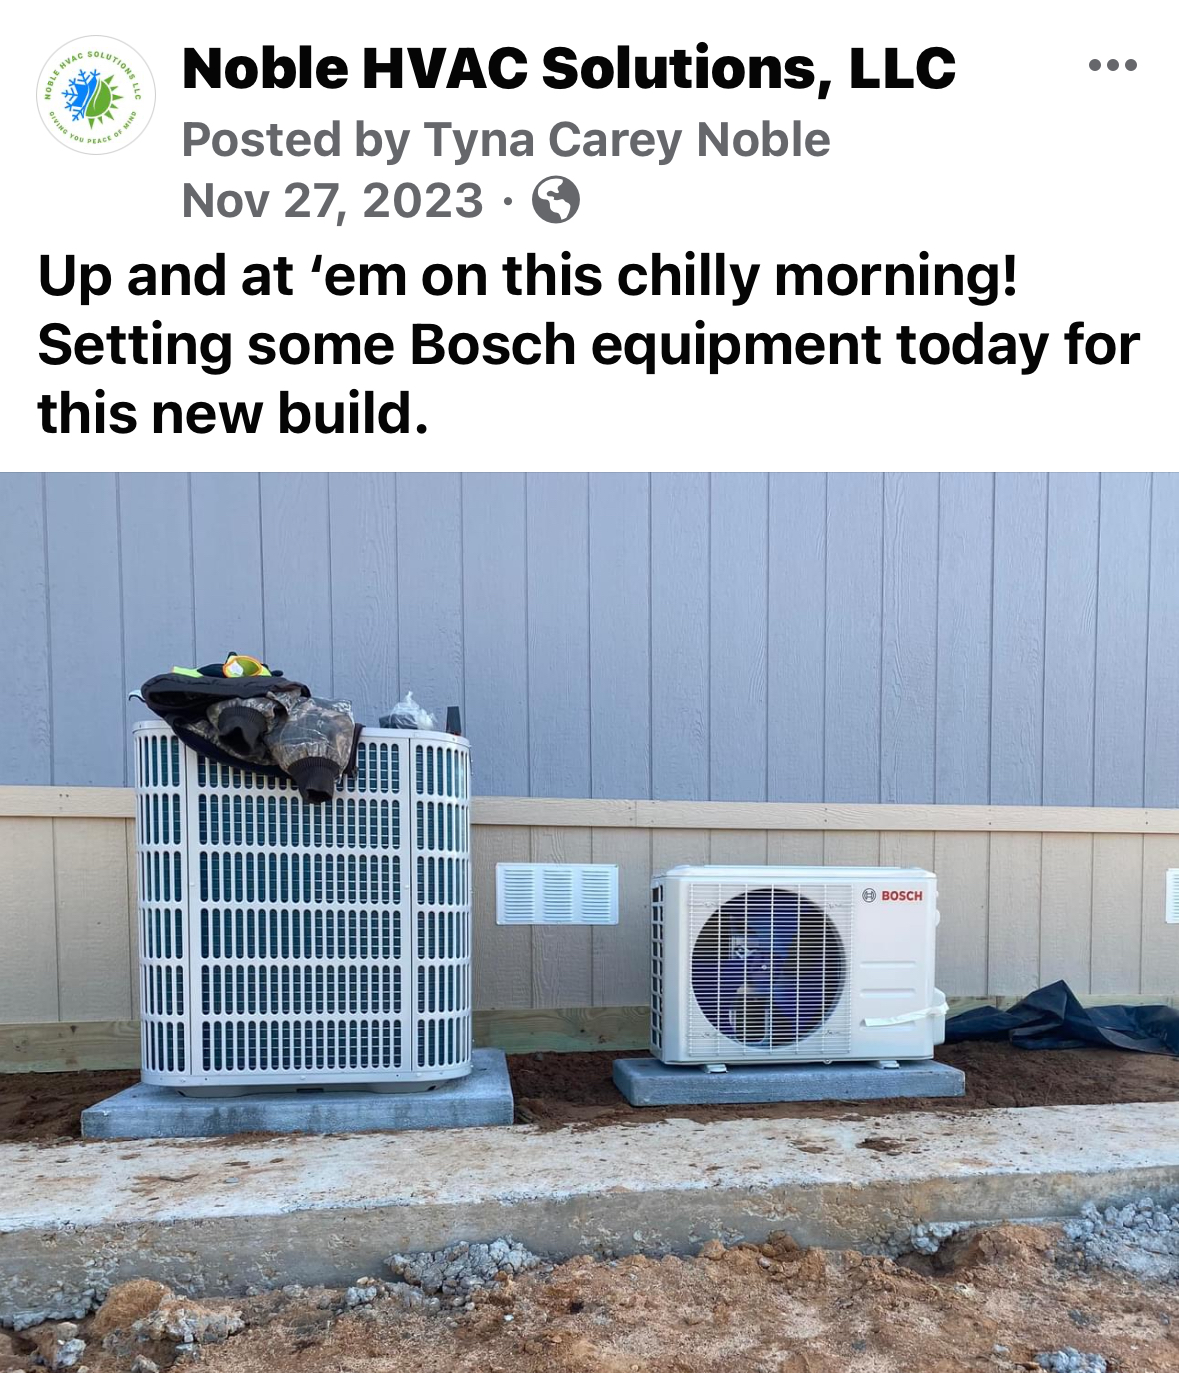 Noble HVAC Solutions